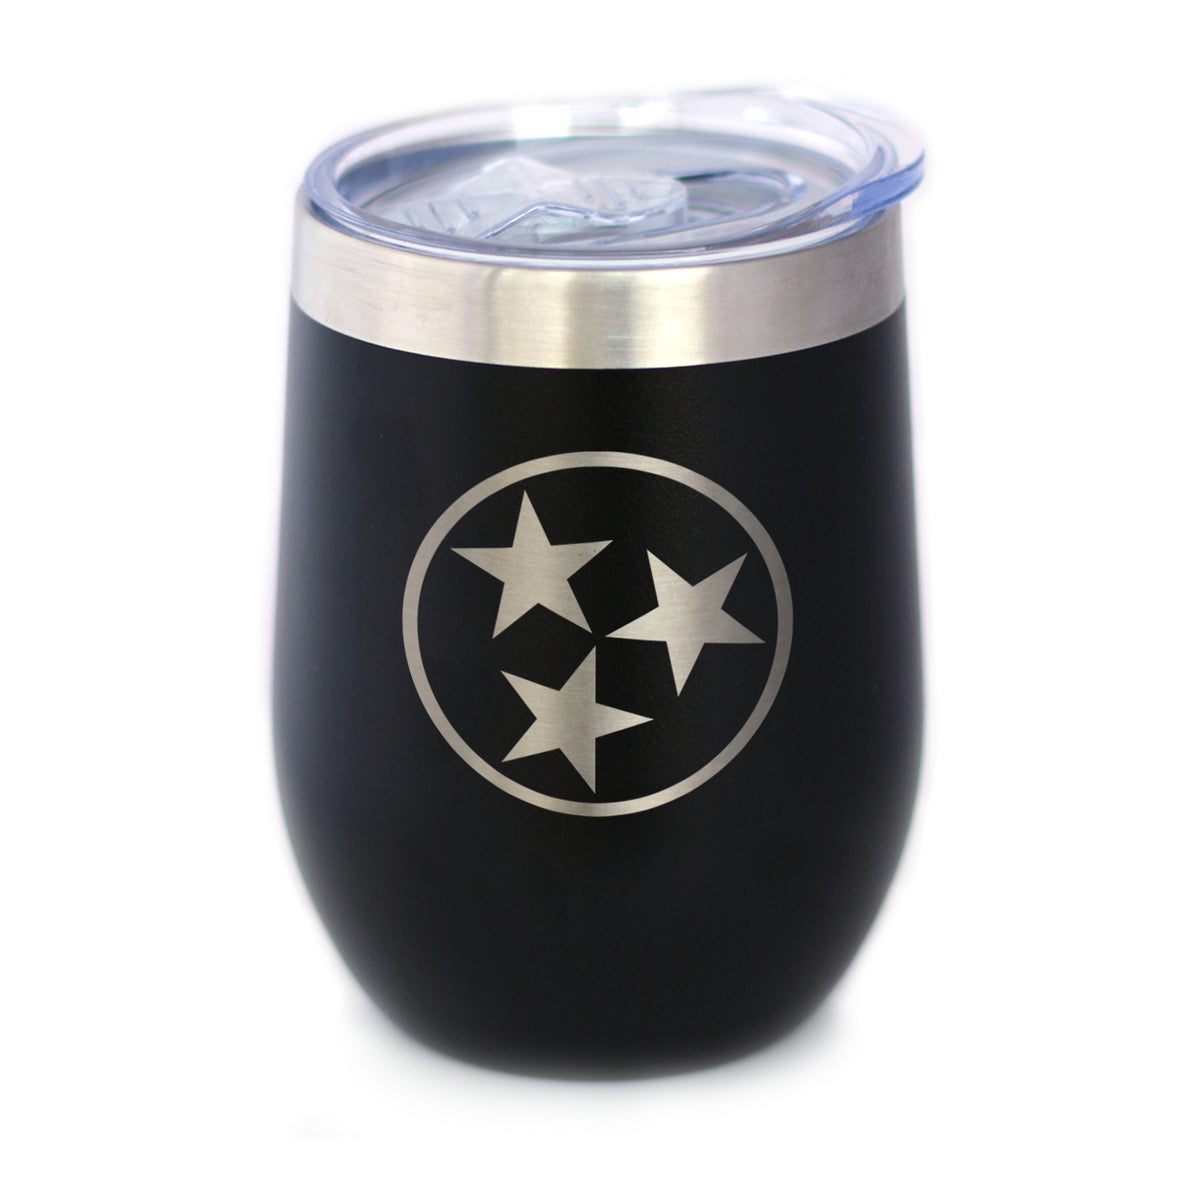 Flag of Tennessee - Wine Tumbler Glass with Sliding Lid - Stainless Steel Insulated Mug - Tennessee Gifts for Women and Men Tennesseans